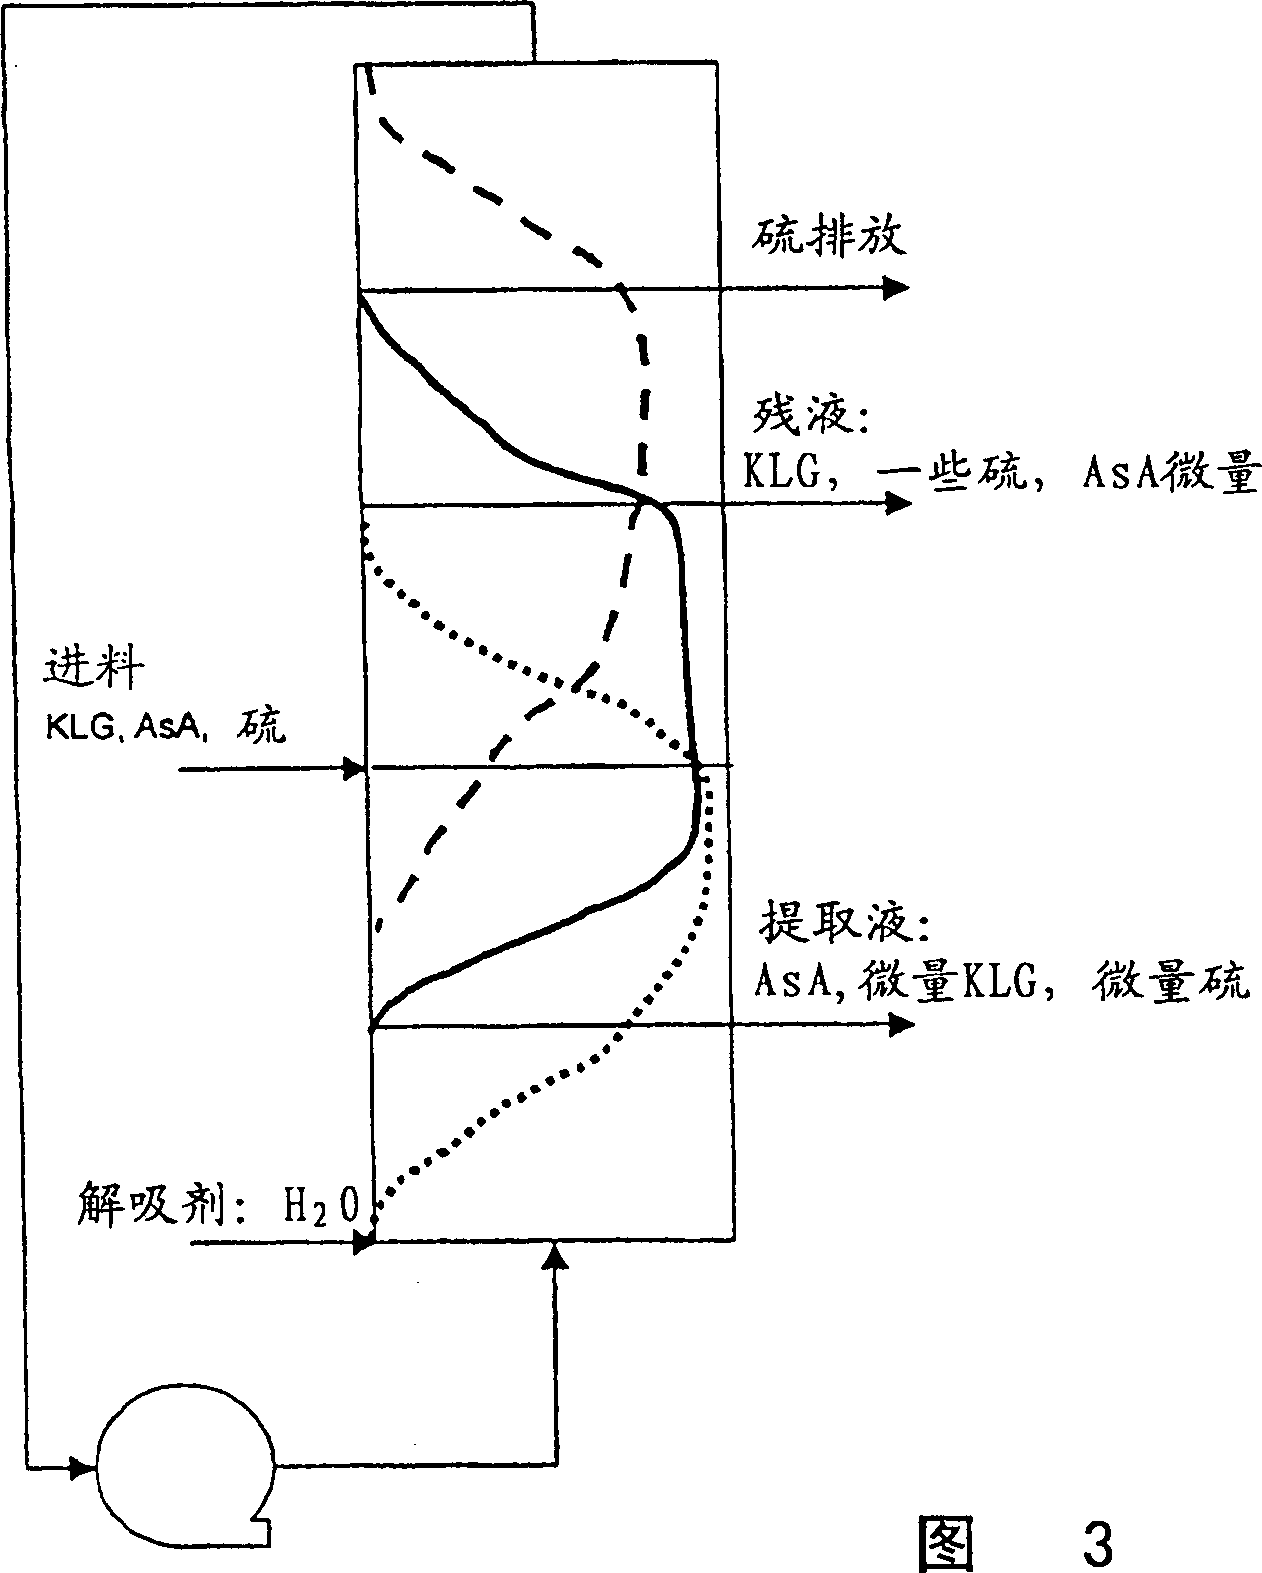 Process for producing ascorbic acid in presence of sulfite